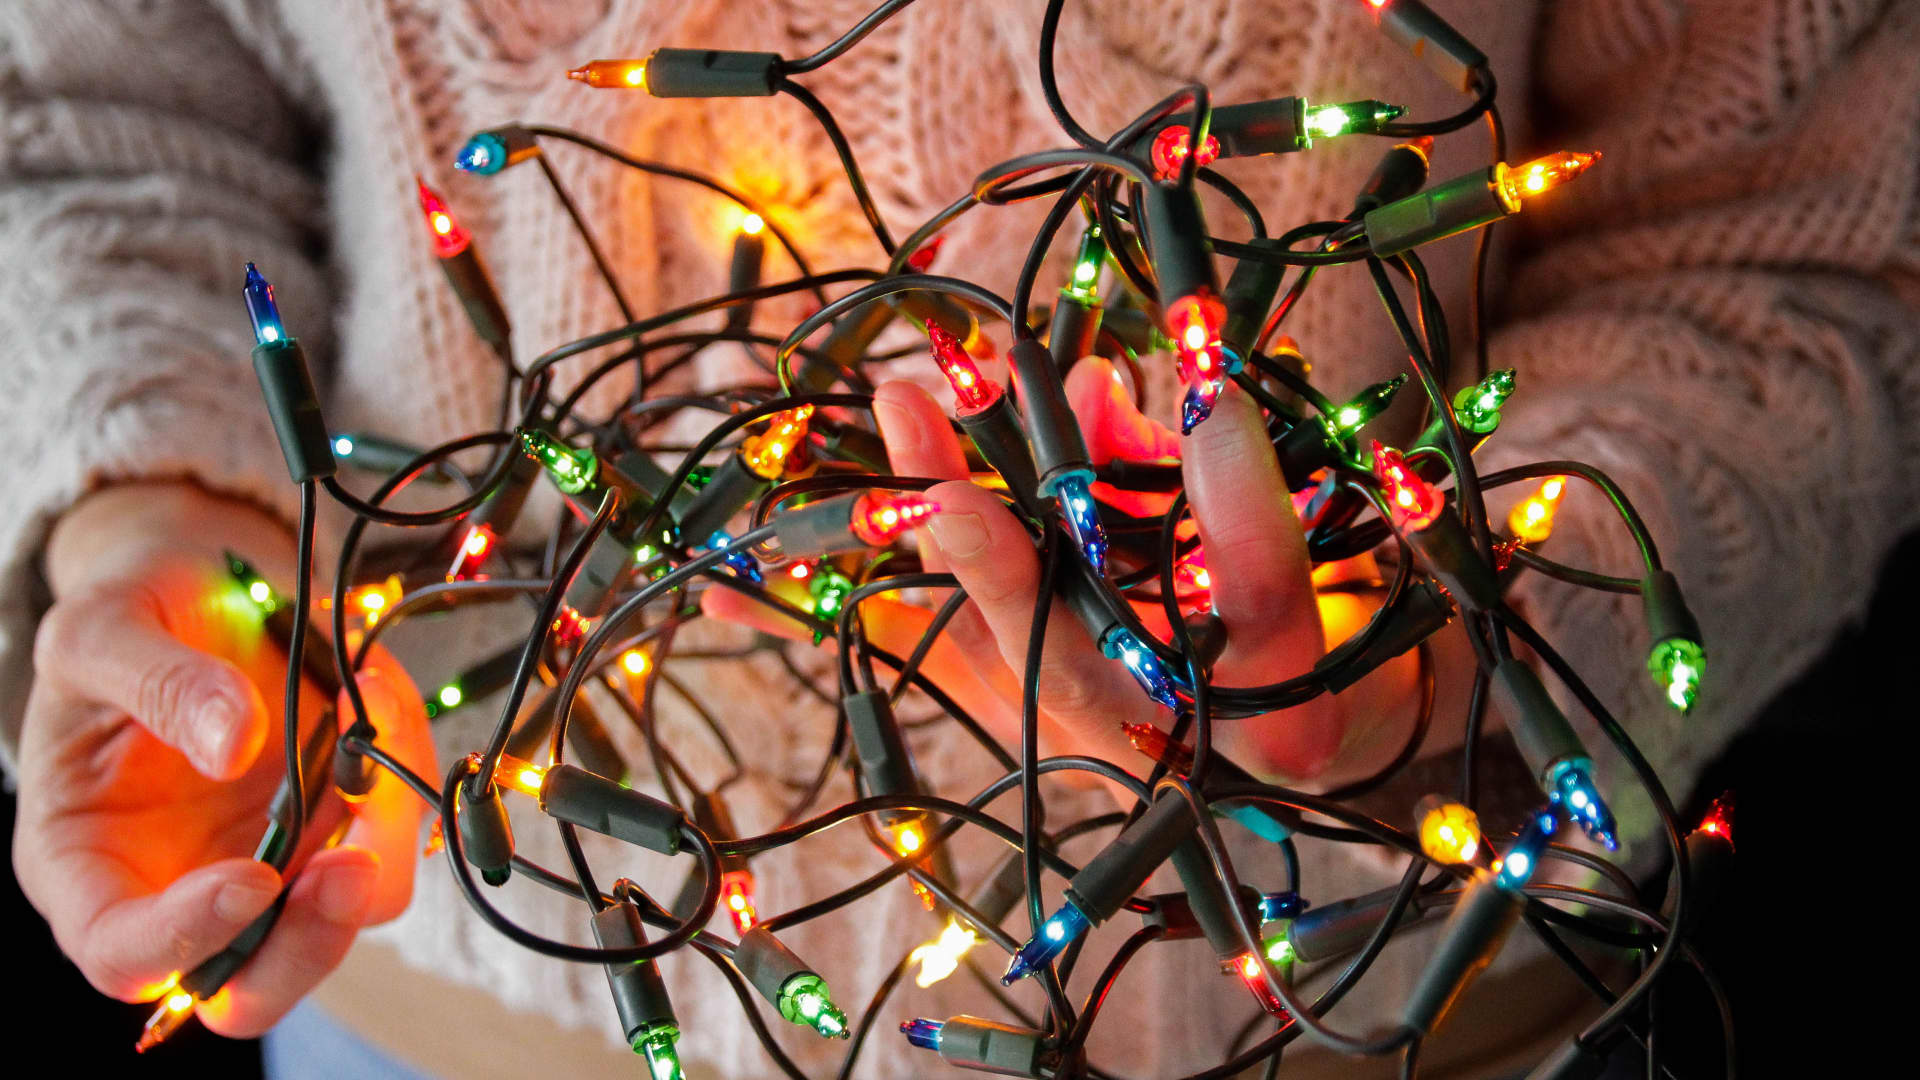 Don’t overlook this health and safety warning on your holiday lights